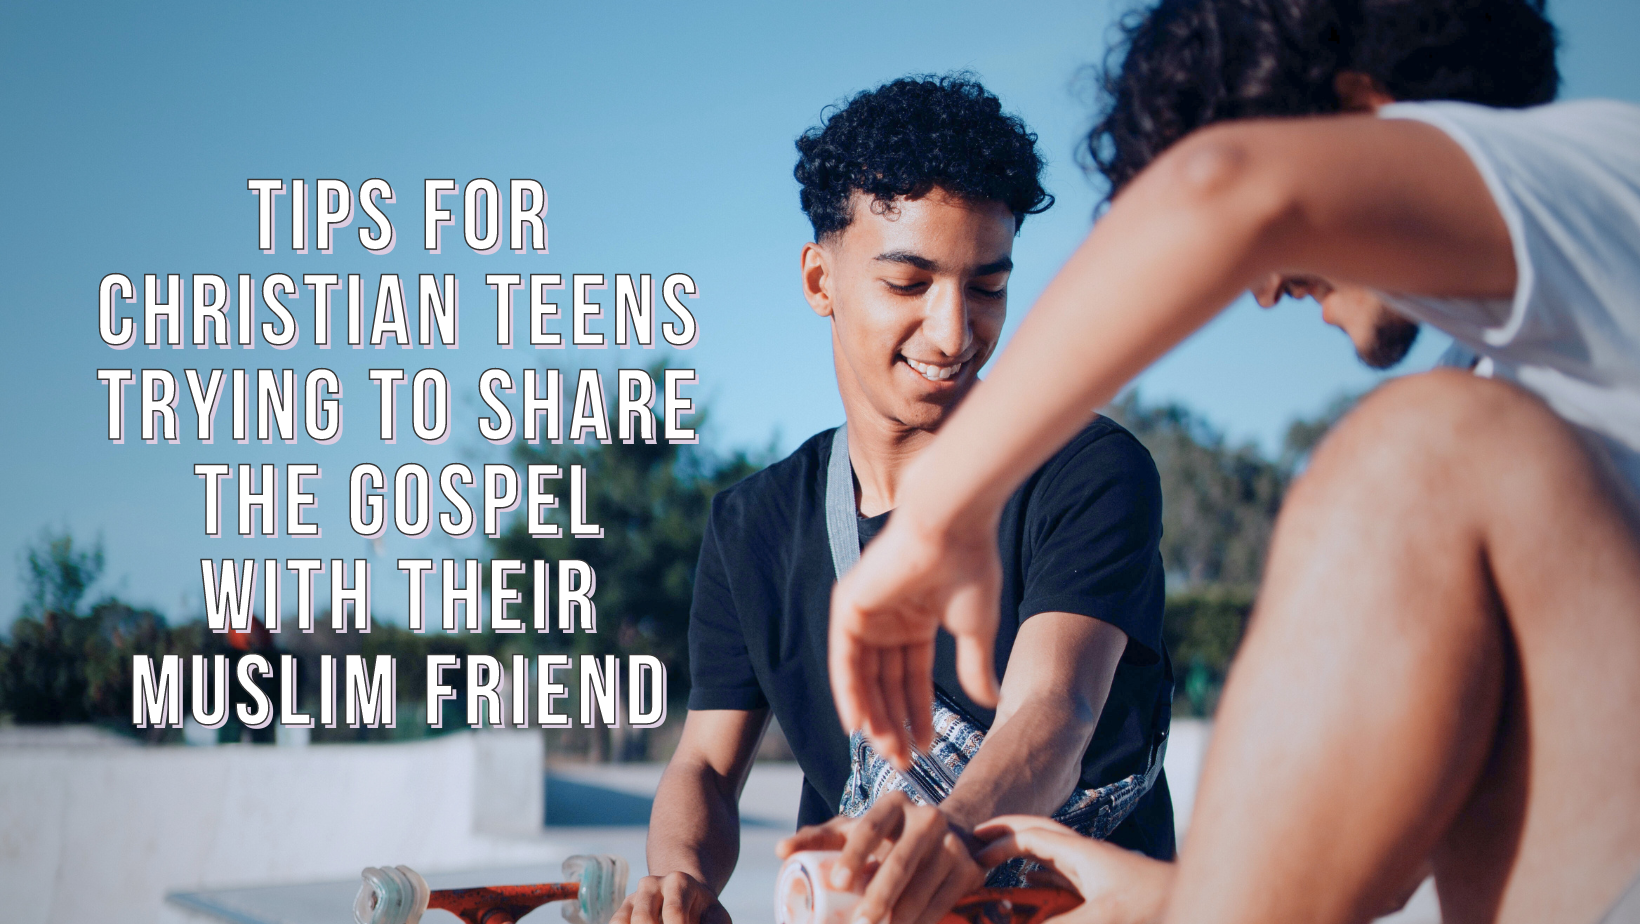 Tips for Christian teens trying to share the gospel with their Muslim friend